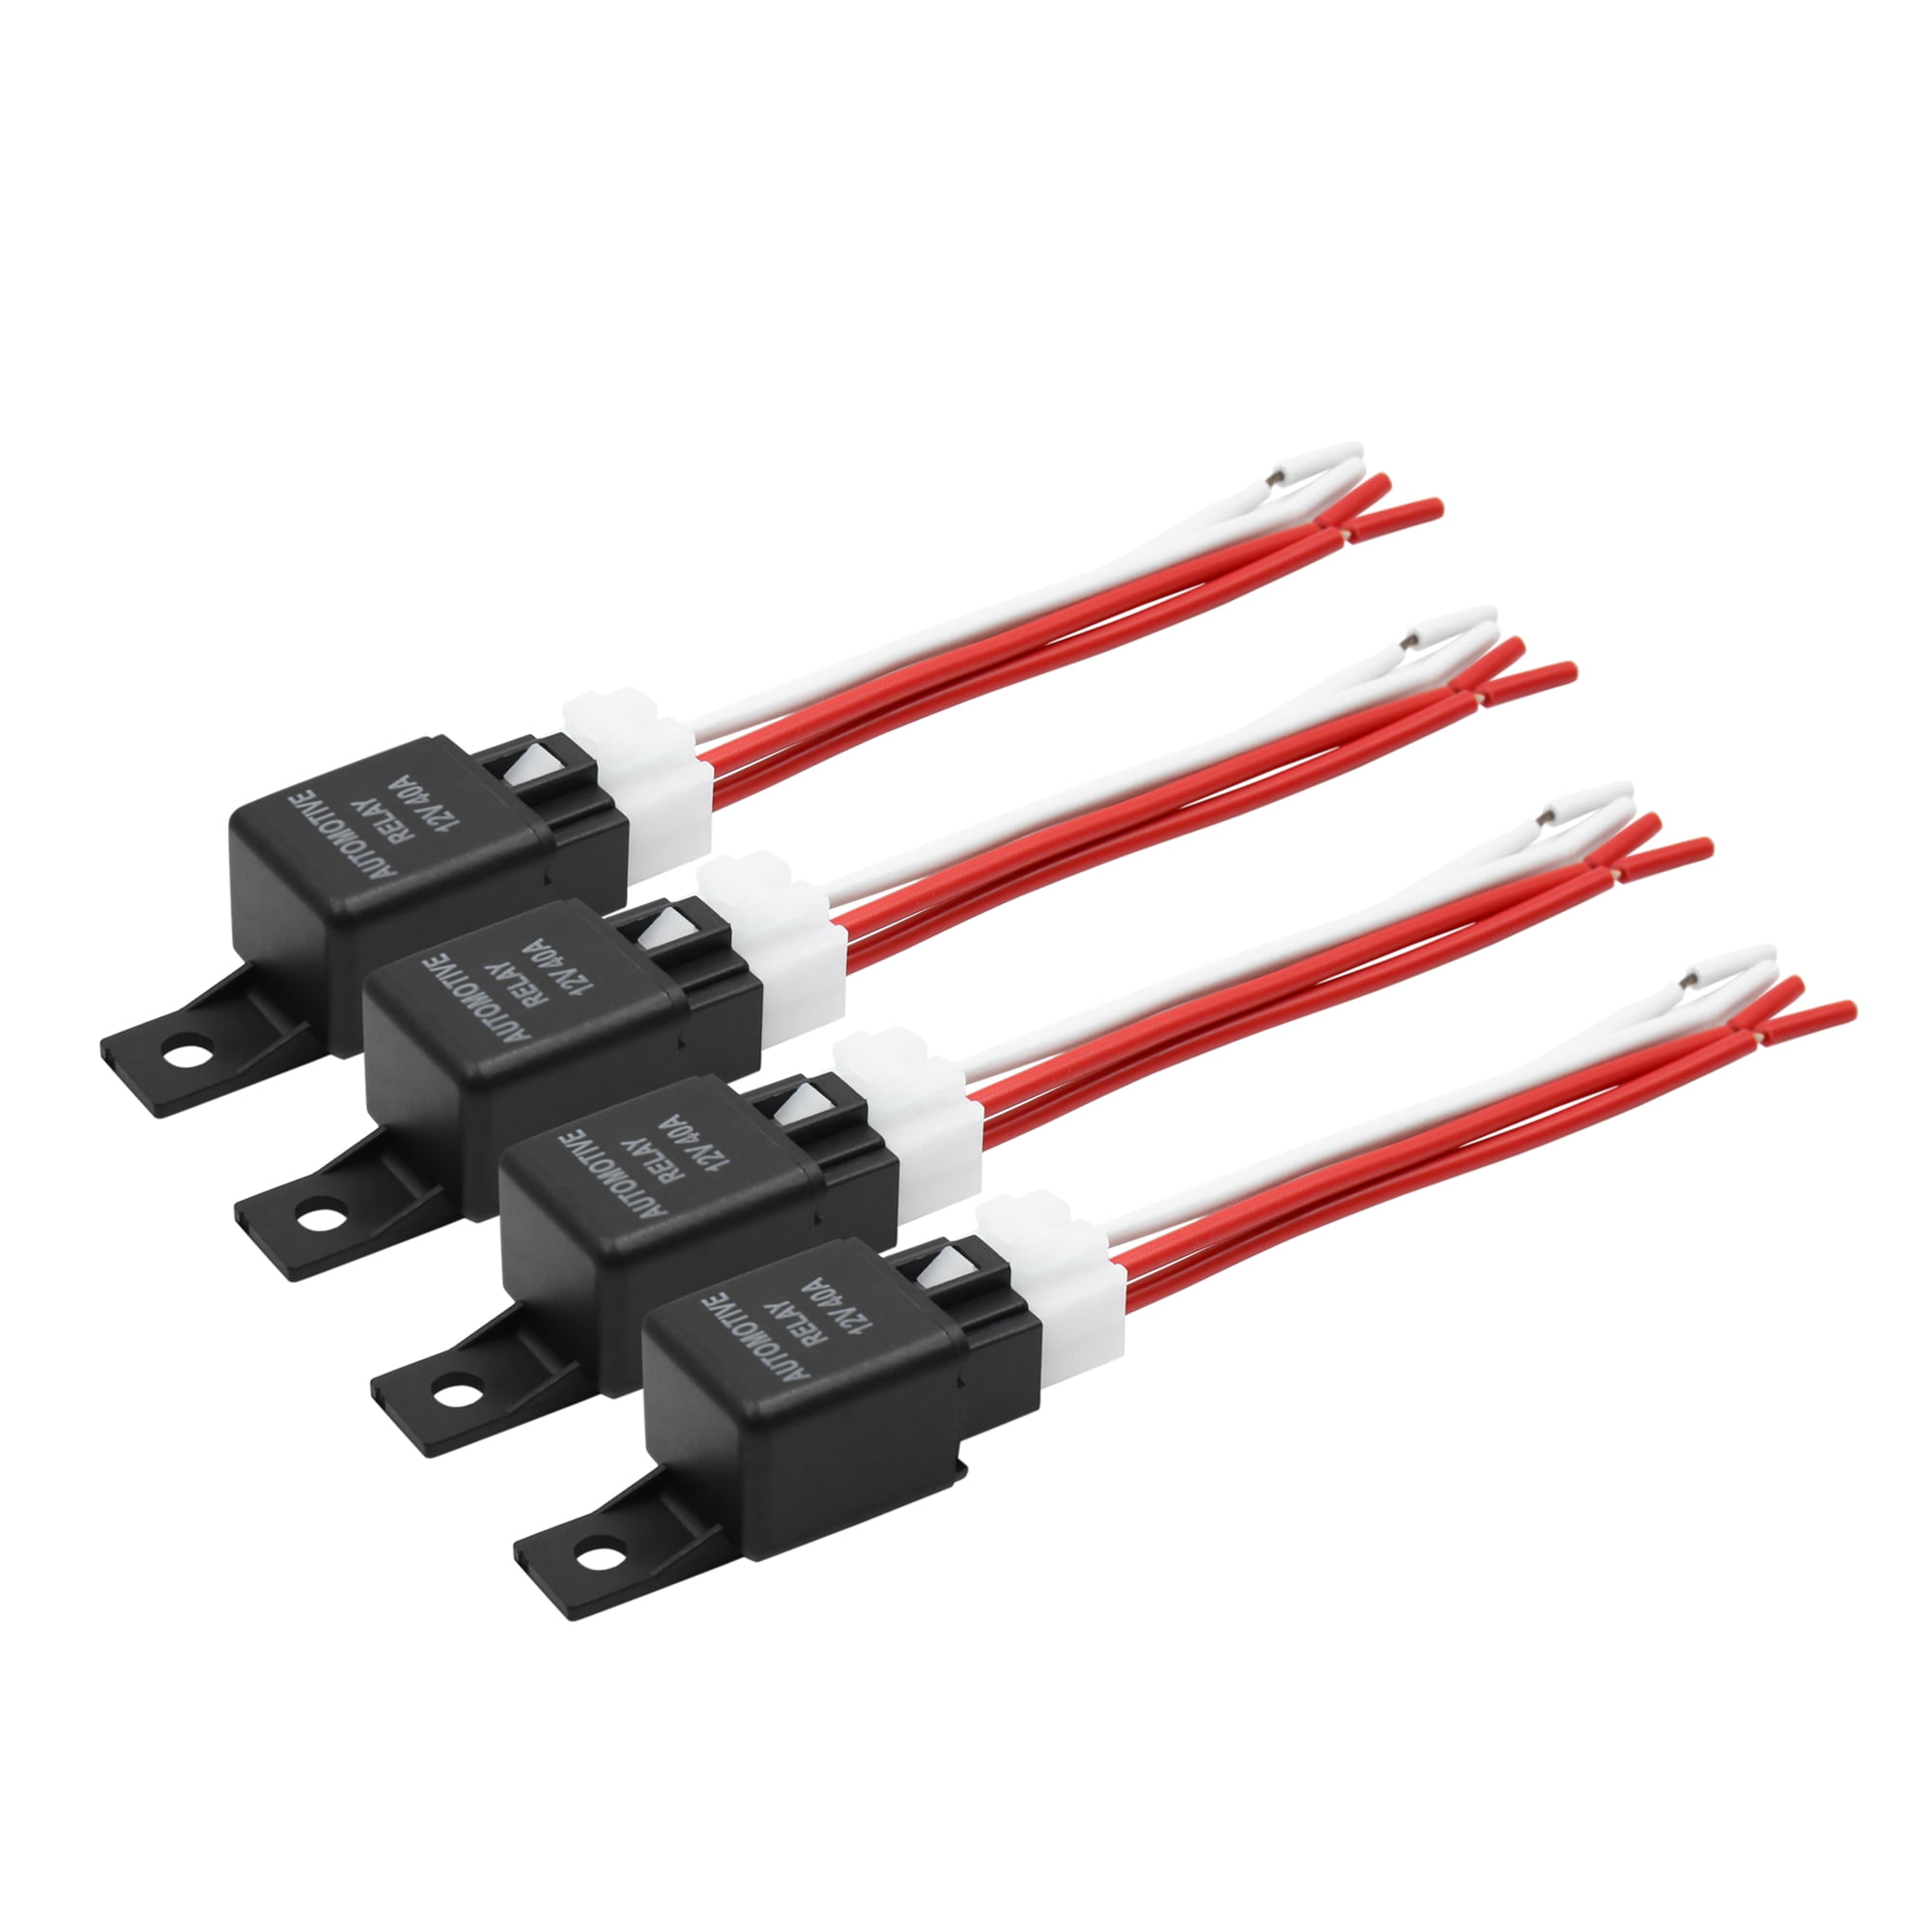 uxcell DC 12V 40A SPST 4 Pin Automotive Car Relay with 4 Wires Harness Socket 2pcs 